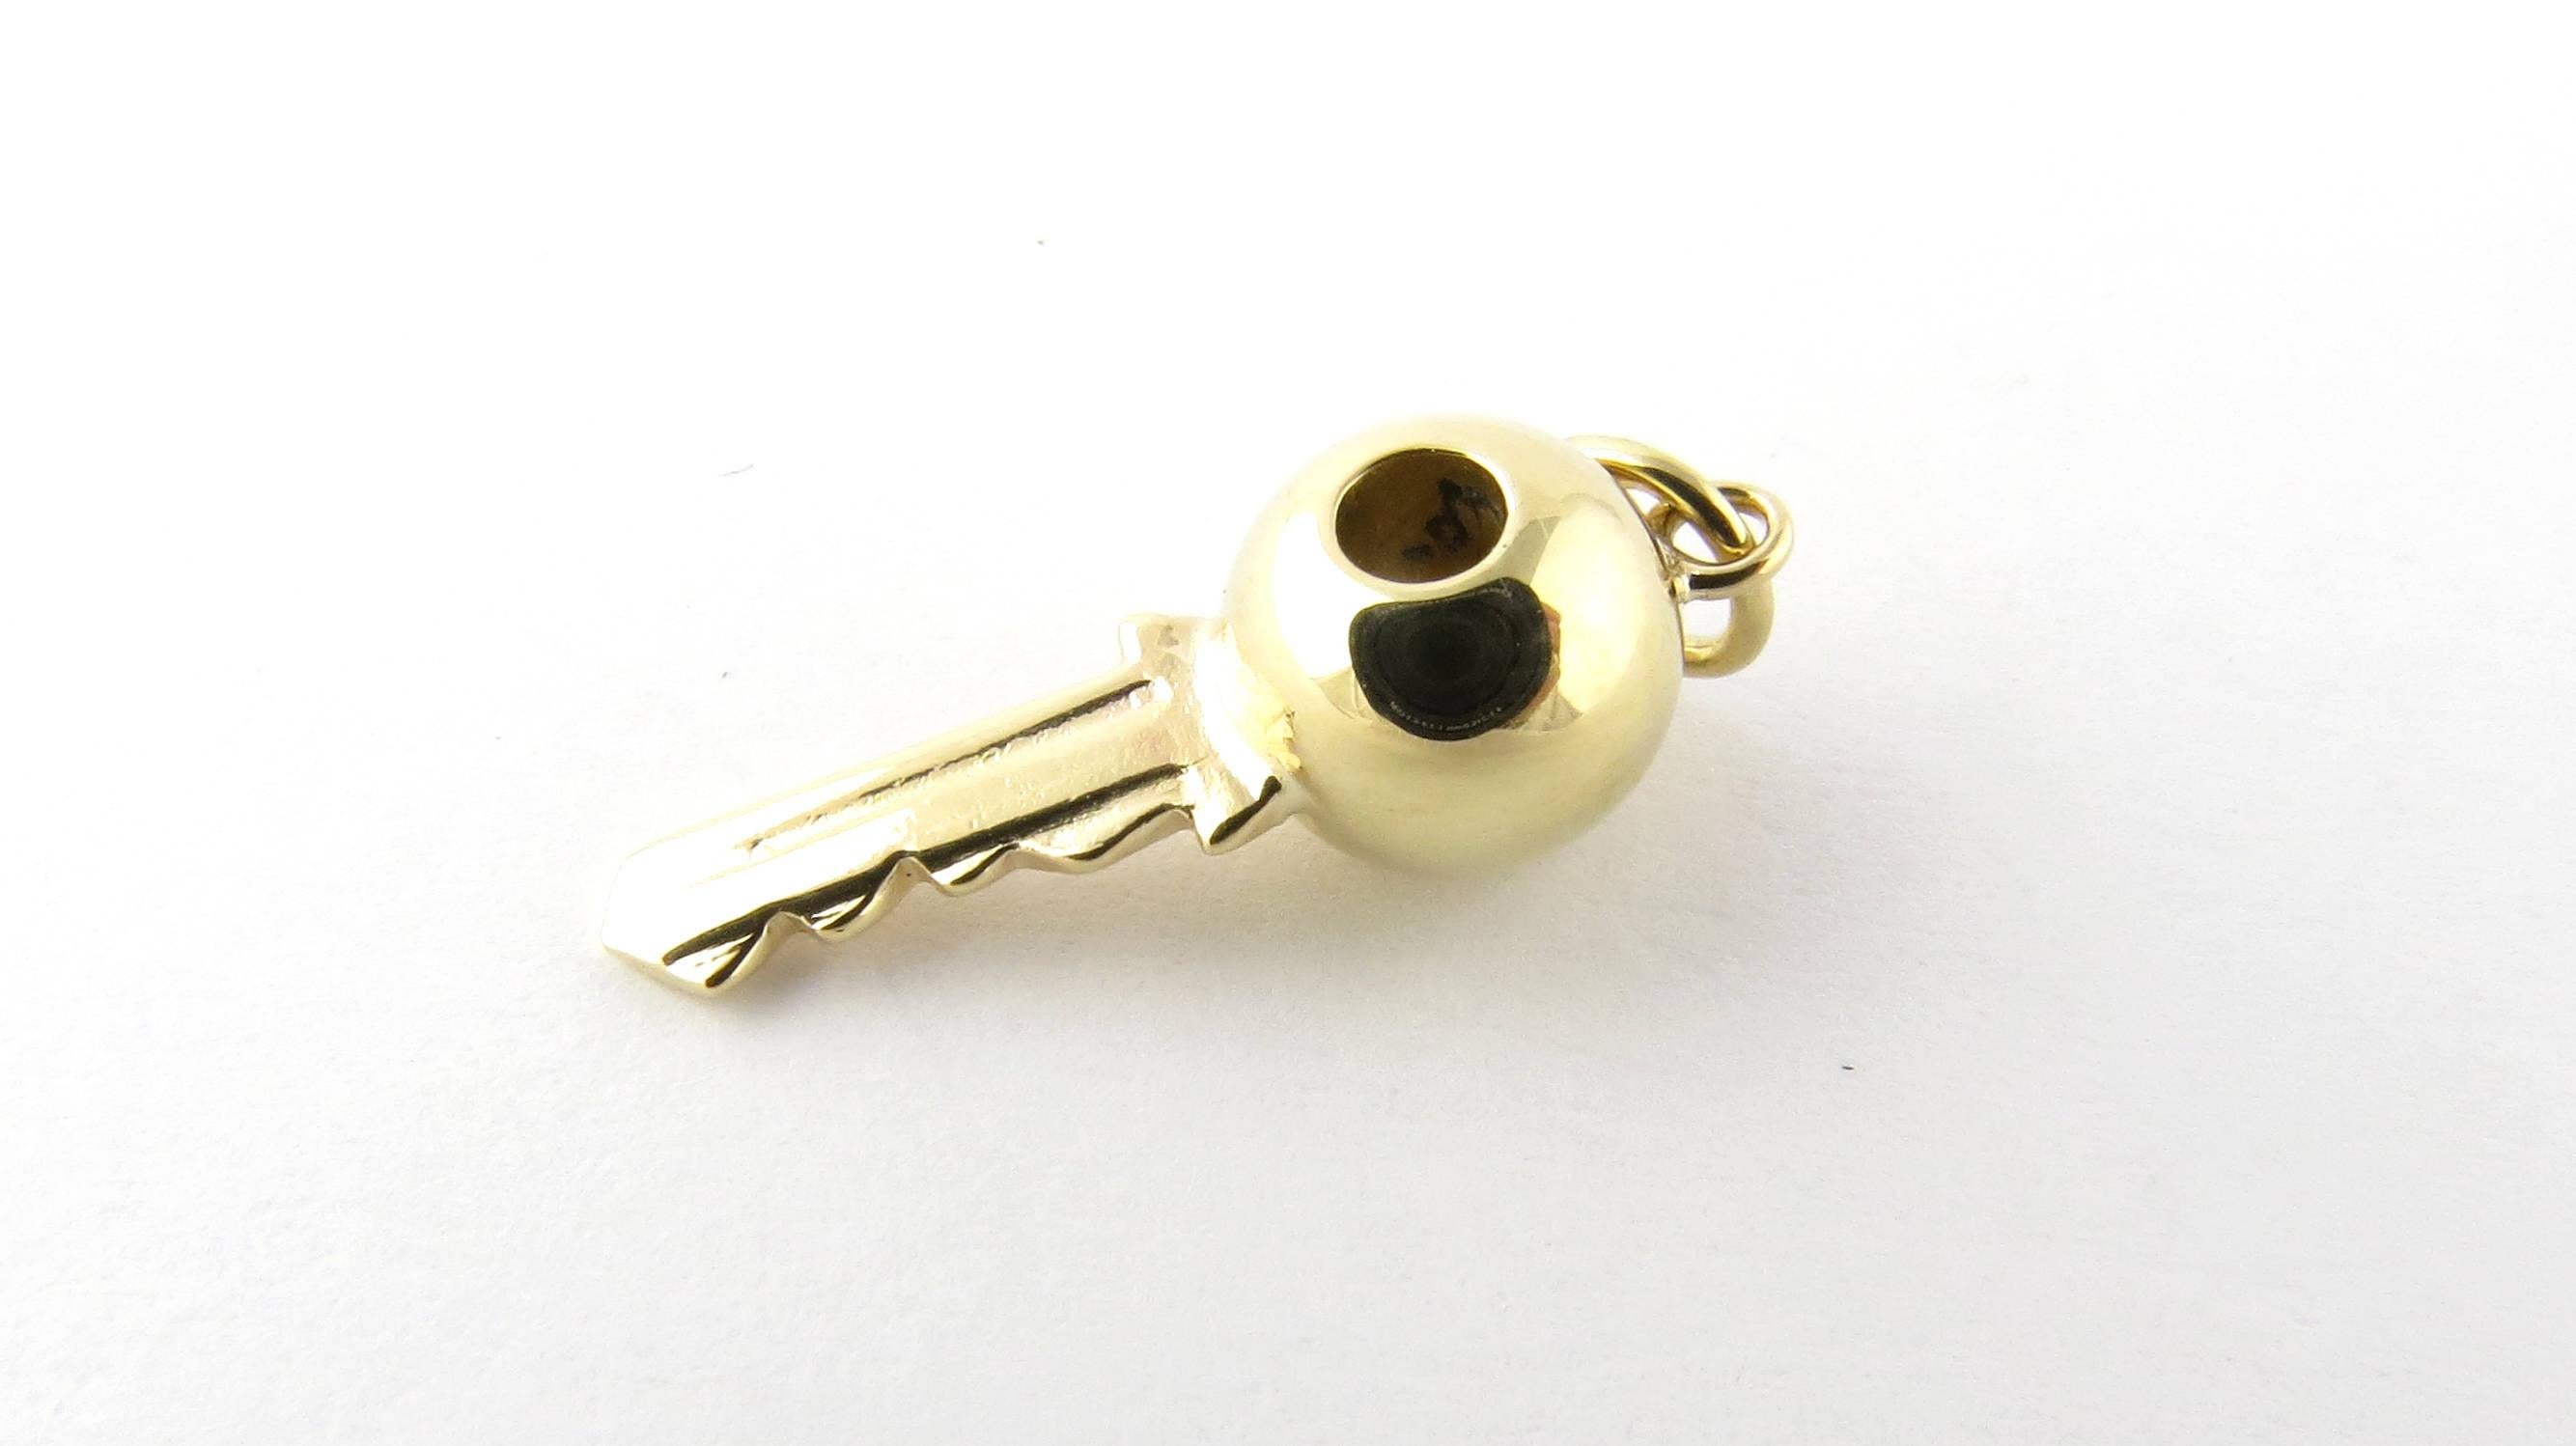 Vintage 14 Karat Yellow Gold Key Charm-

This lovely charm features a miniature 3D key meticulously detailed in 14K yellow gold.

Size: 21 mm x 8 mm

Weight: 0.8 dwt. / 1.3 gr.

Hallmark: Acid tested for 14K gold.

Very good condition,